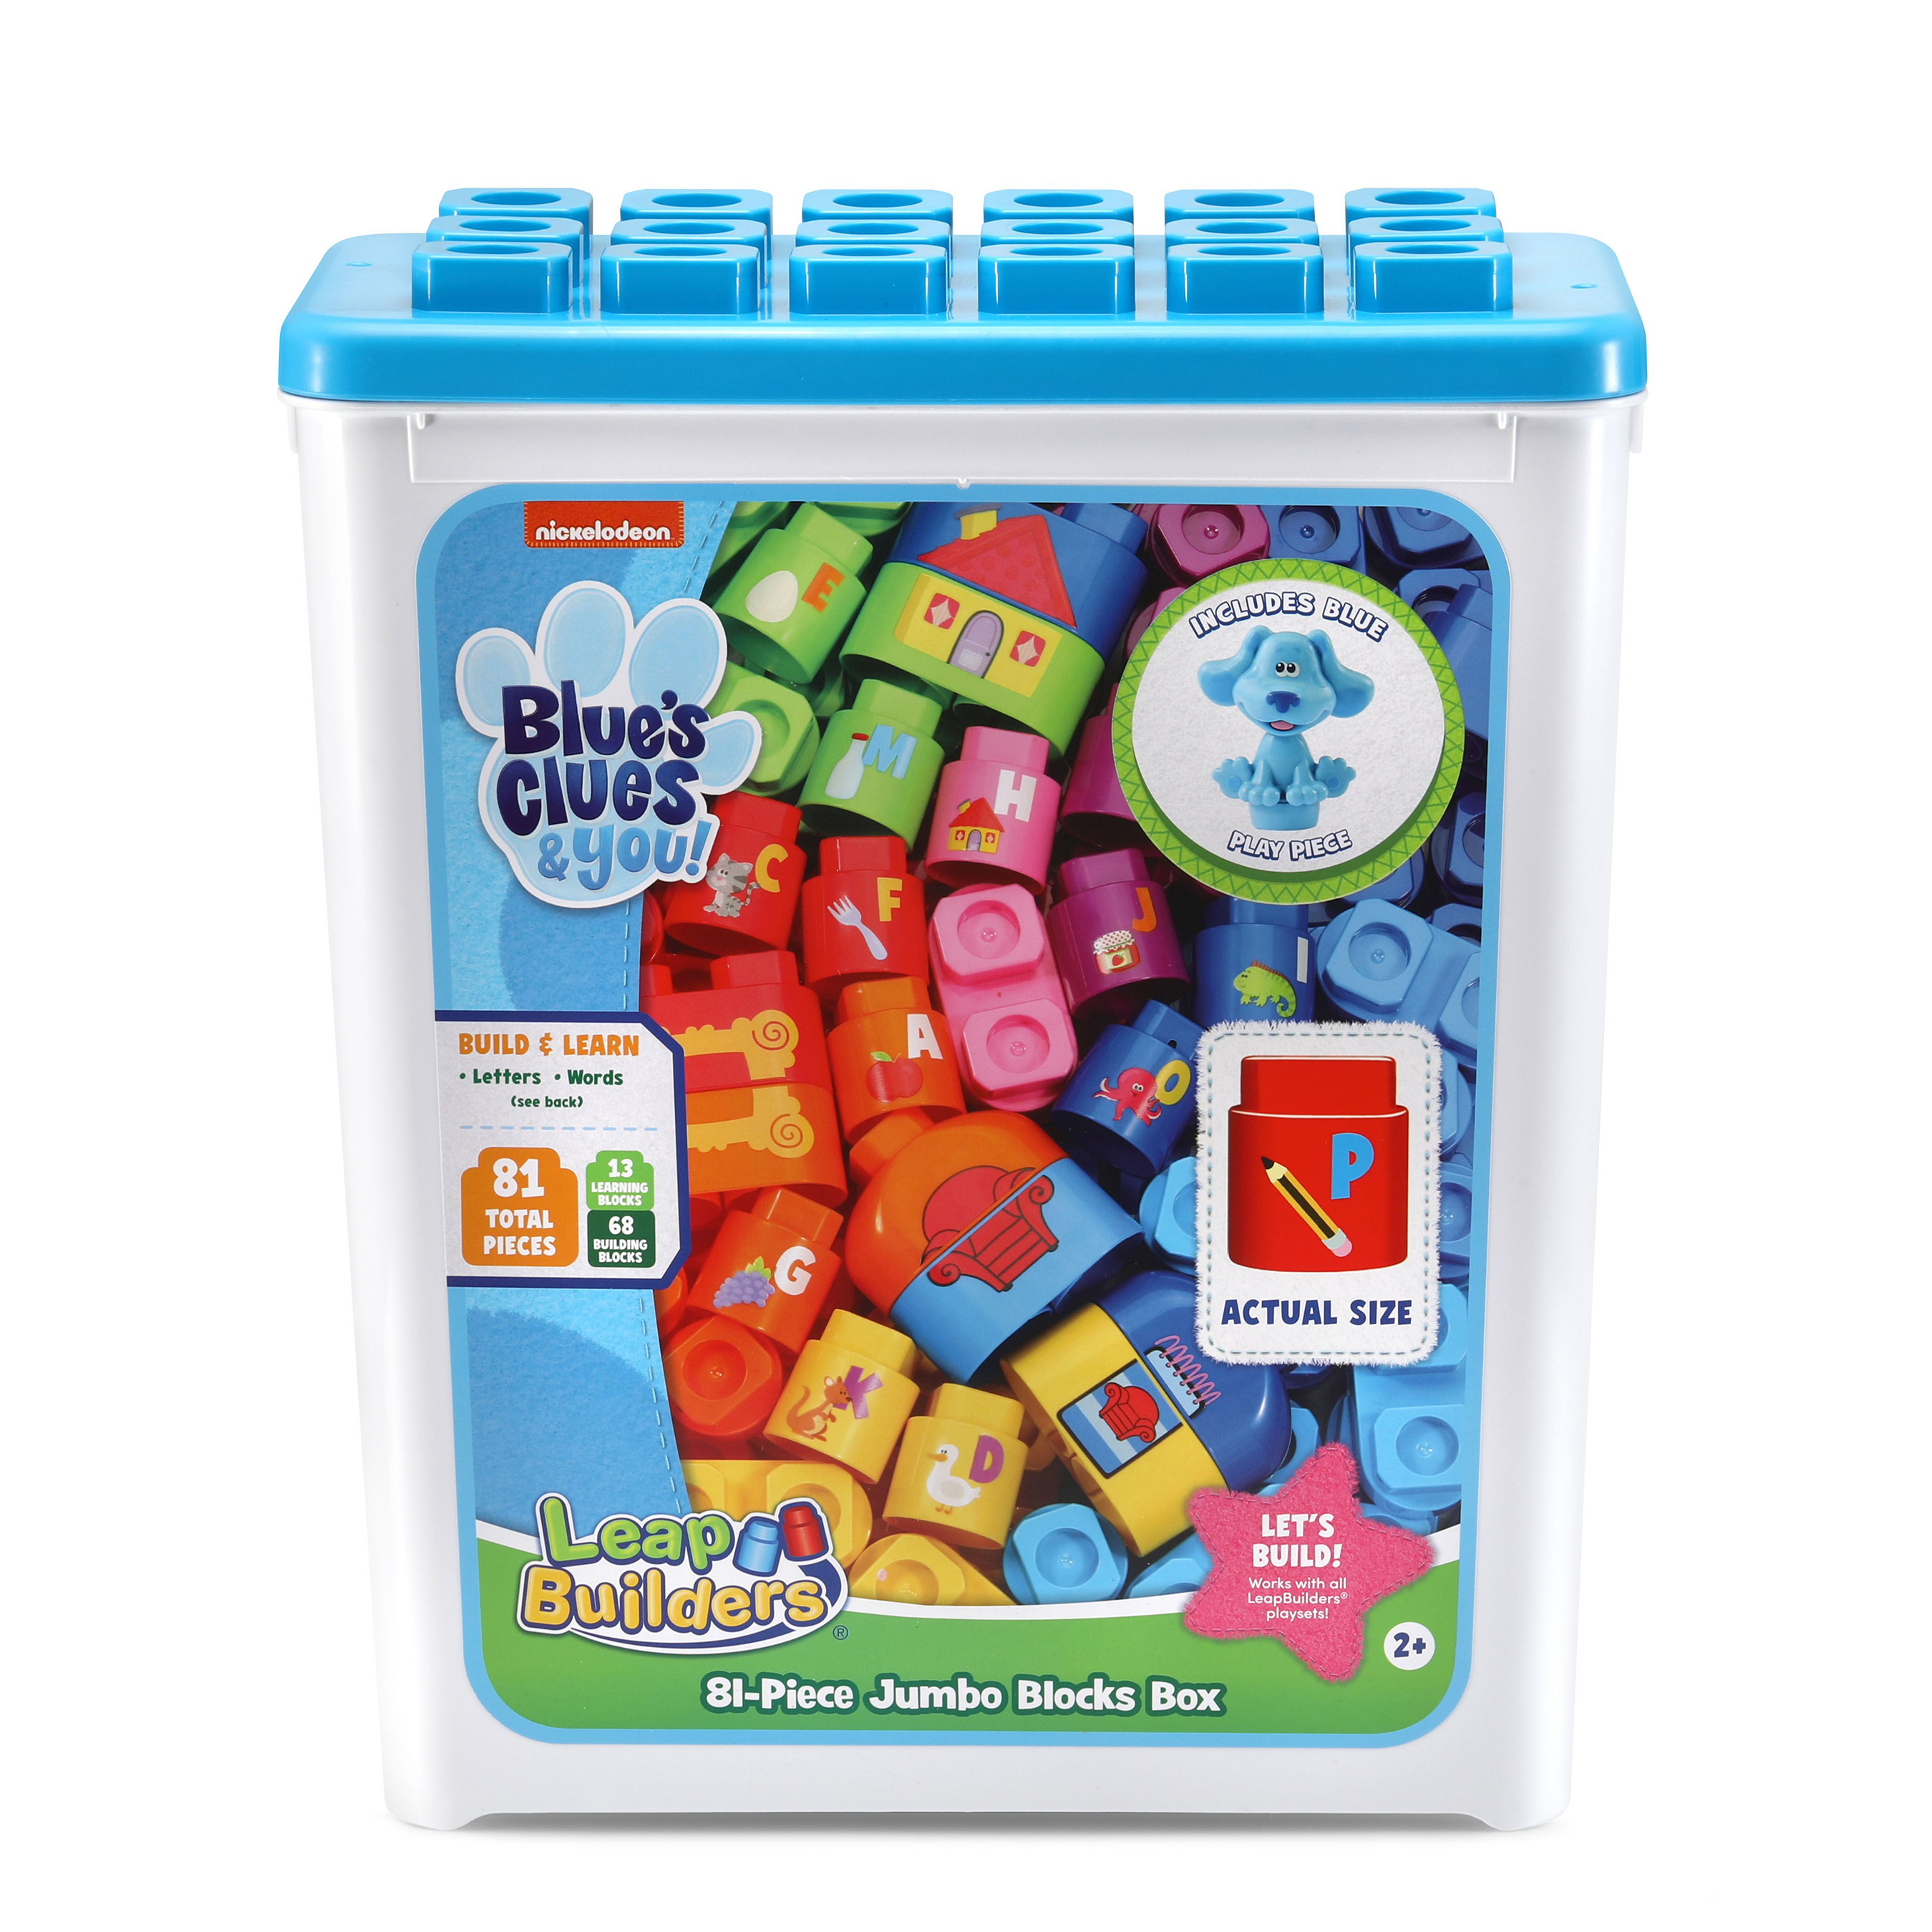 New LeapBuilders Blue's Clues & You! 81-Piece Jumbo Blocks Box from LeapFrog is available now.